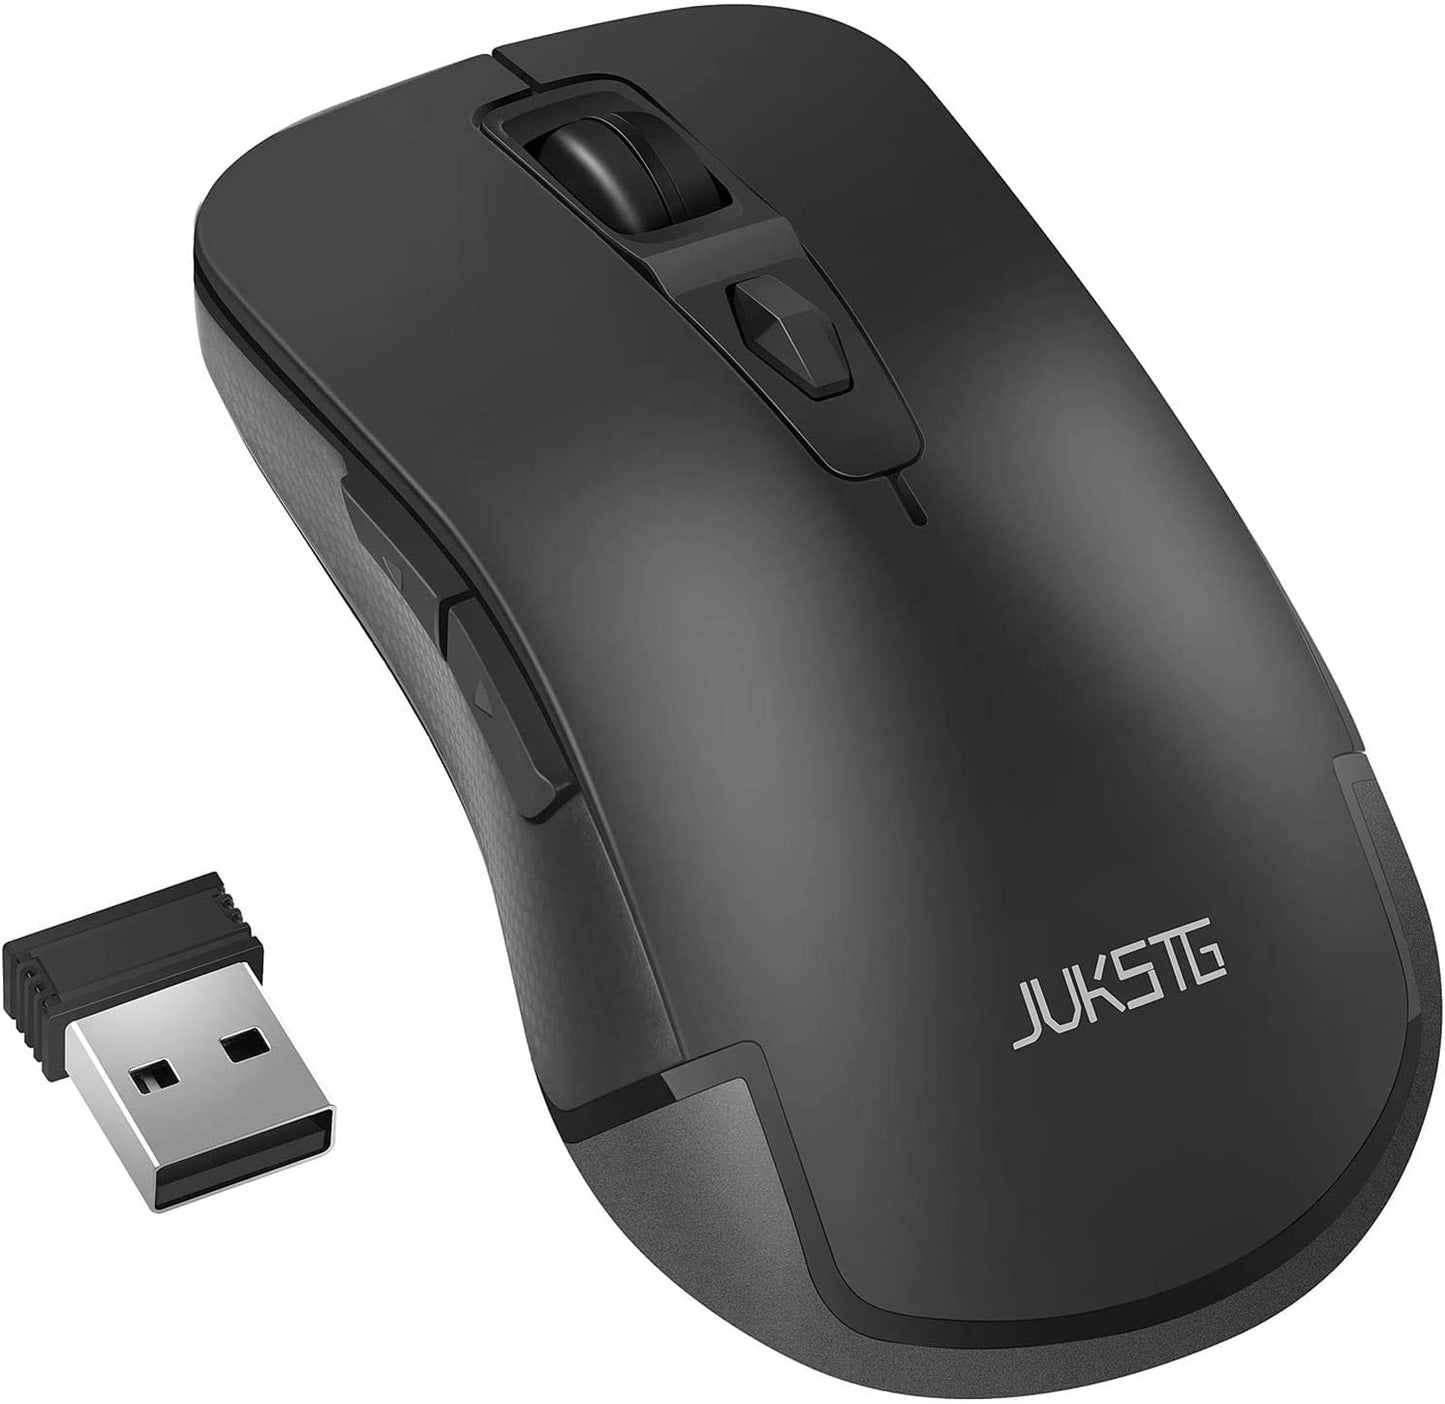 Wireless Mouse 2.4G Ergonomic Mouse with USB Nano Receiver, 3 Adjustable DPI Levels, 6 Buttons, Super Power Saving, for Computer with PC / Windows / Mac, Home&amp;Office, Black - Home Decor Gifts and More